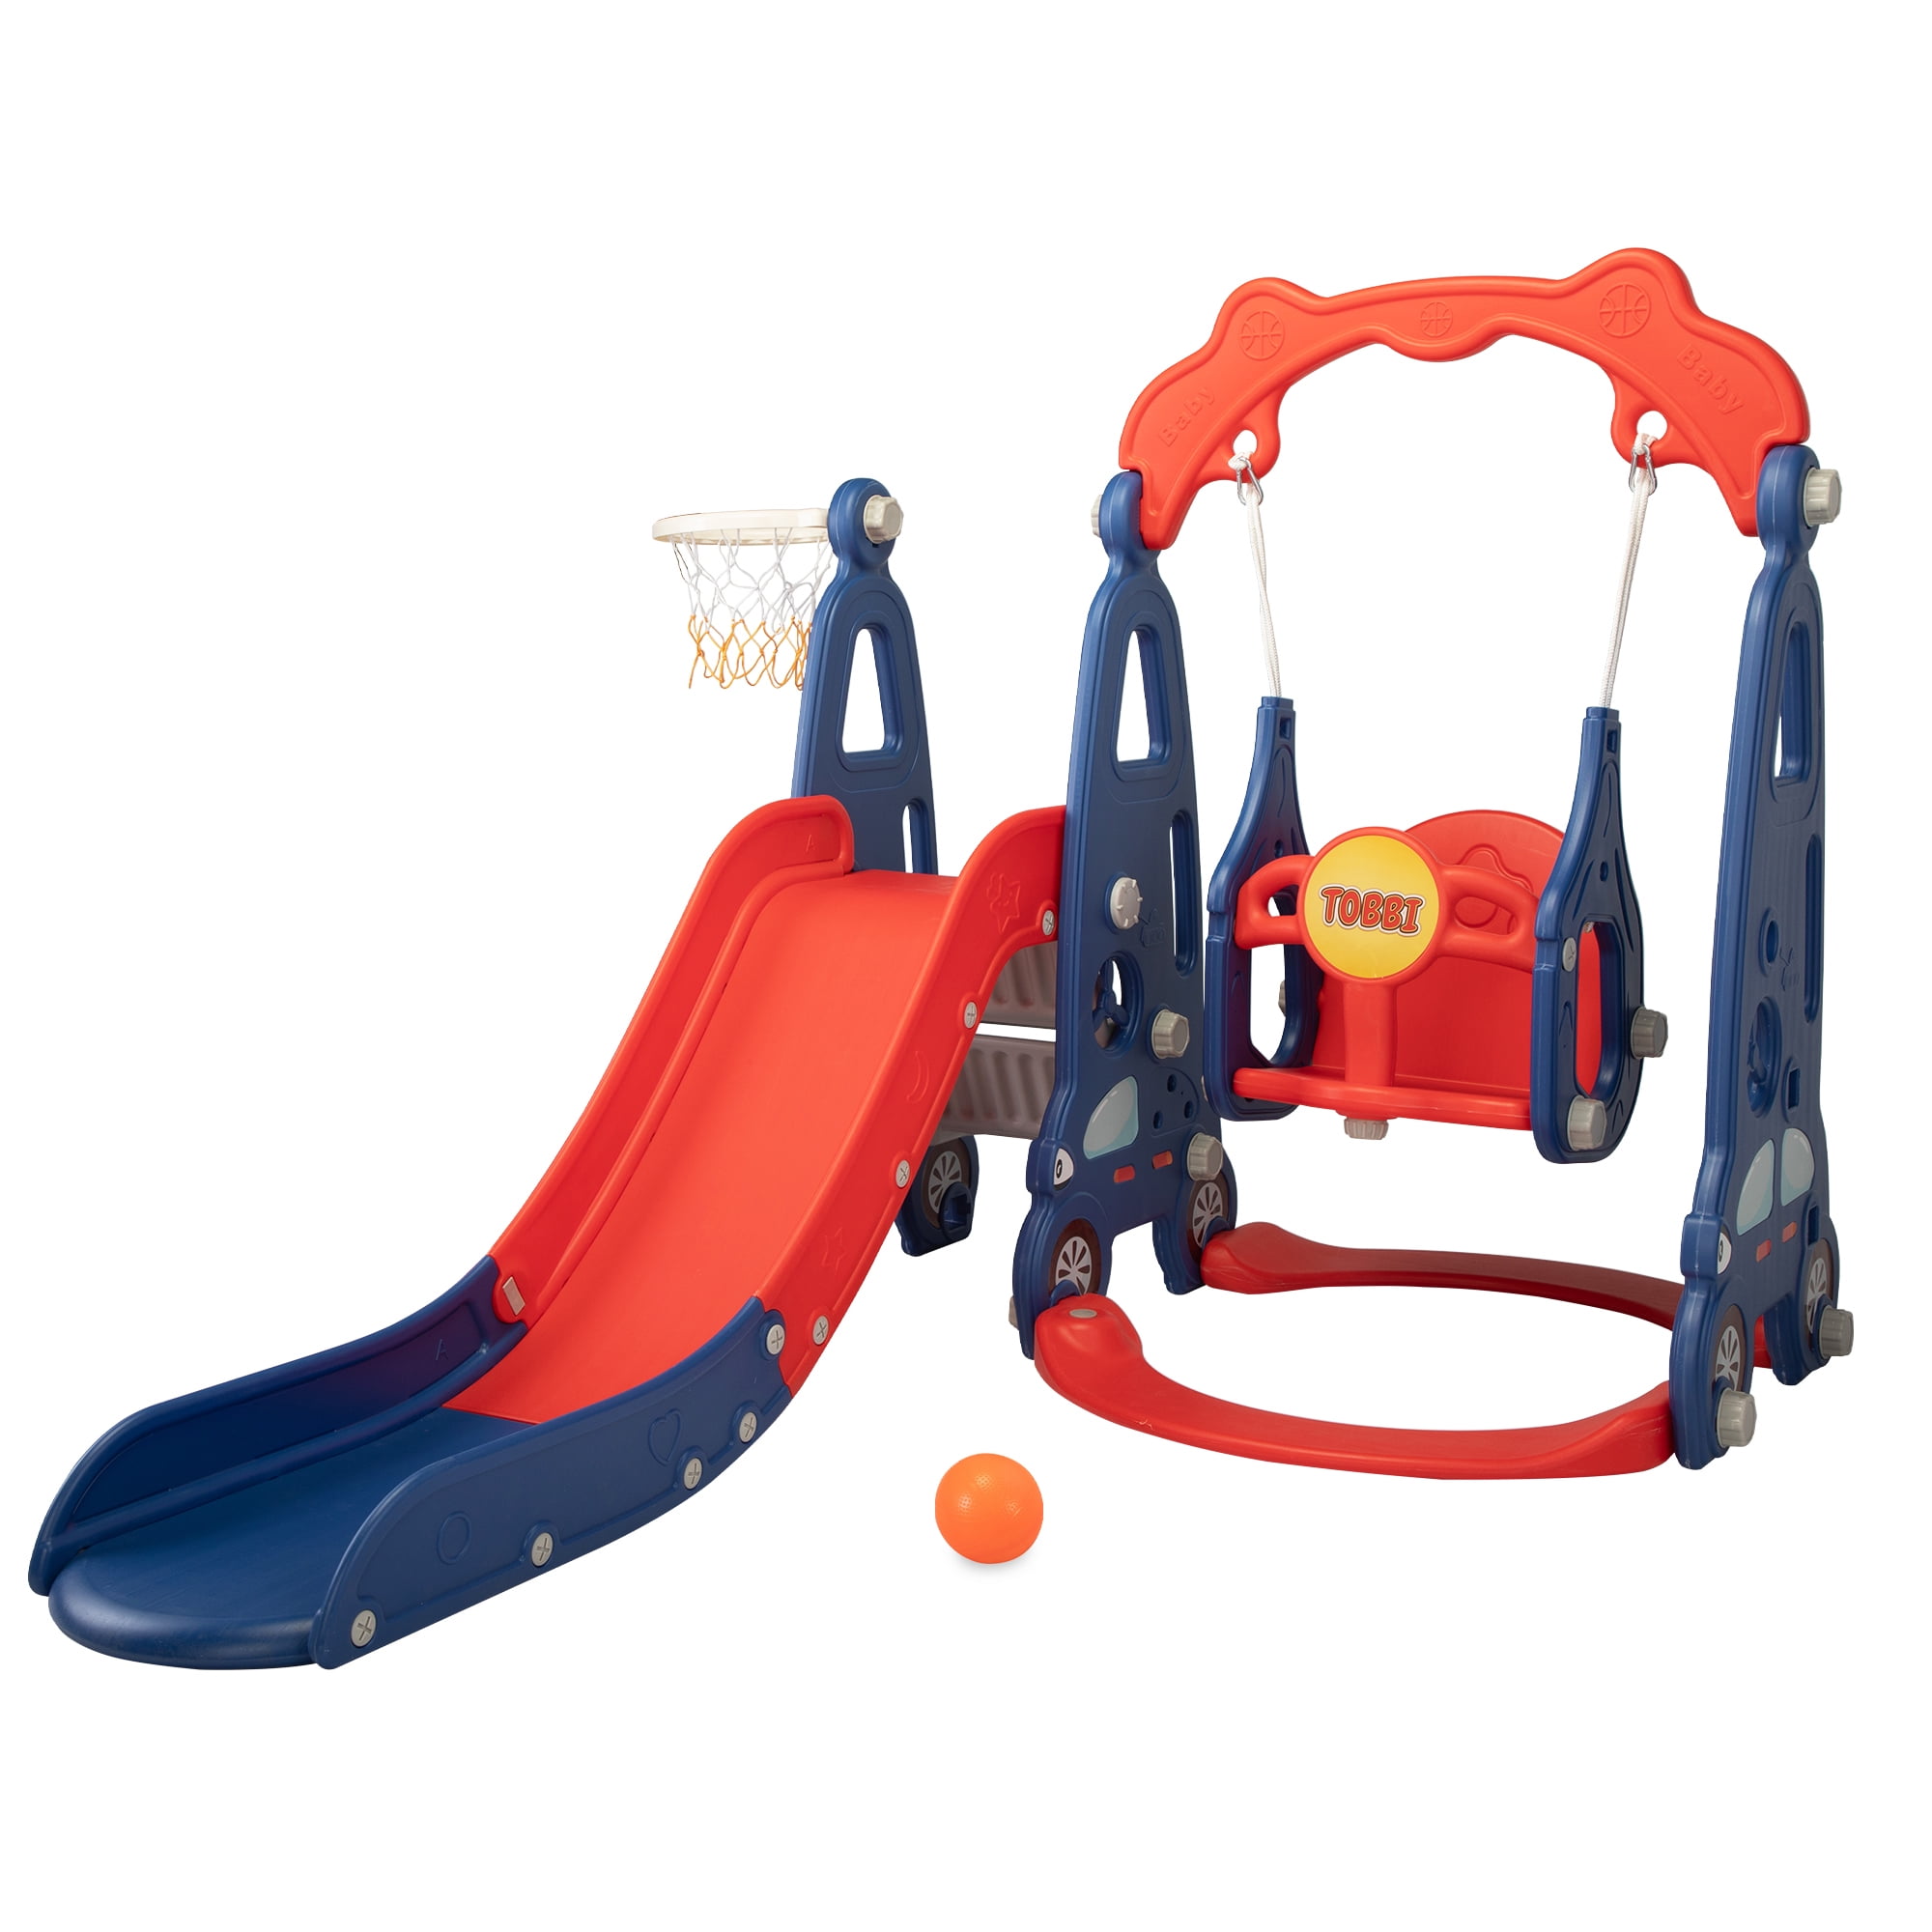 Details about   US Kids Slide Swing Playset Climber Music Basketball Frame DIY Christmas Toy  ┞ 